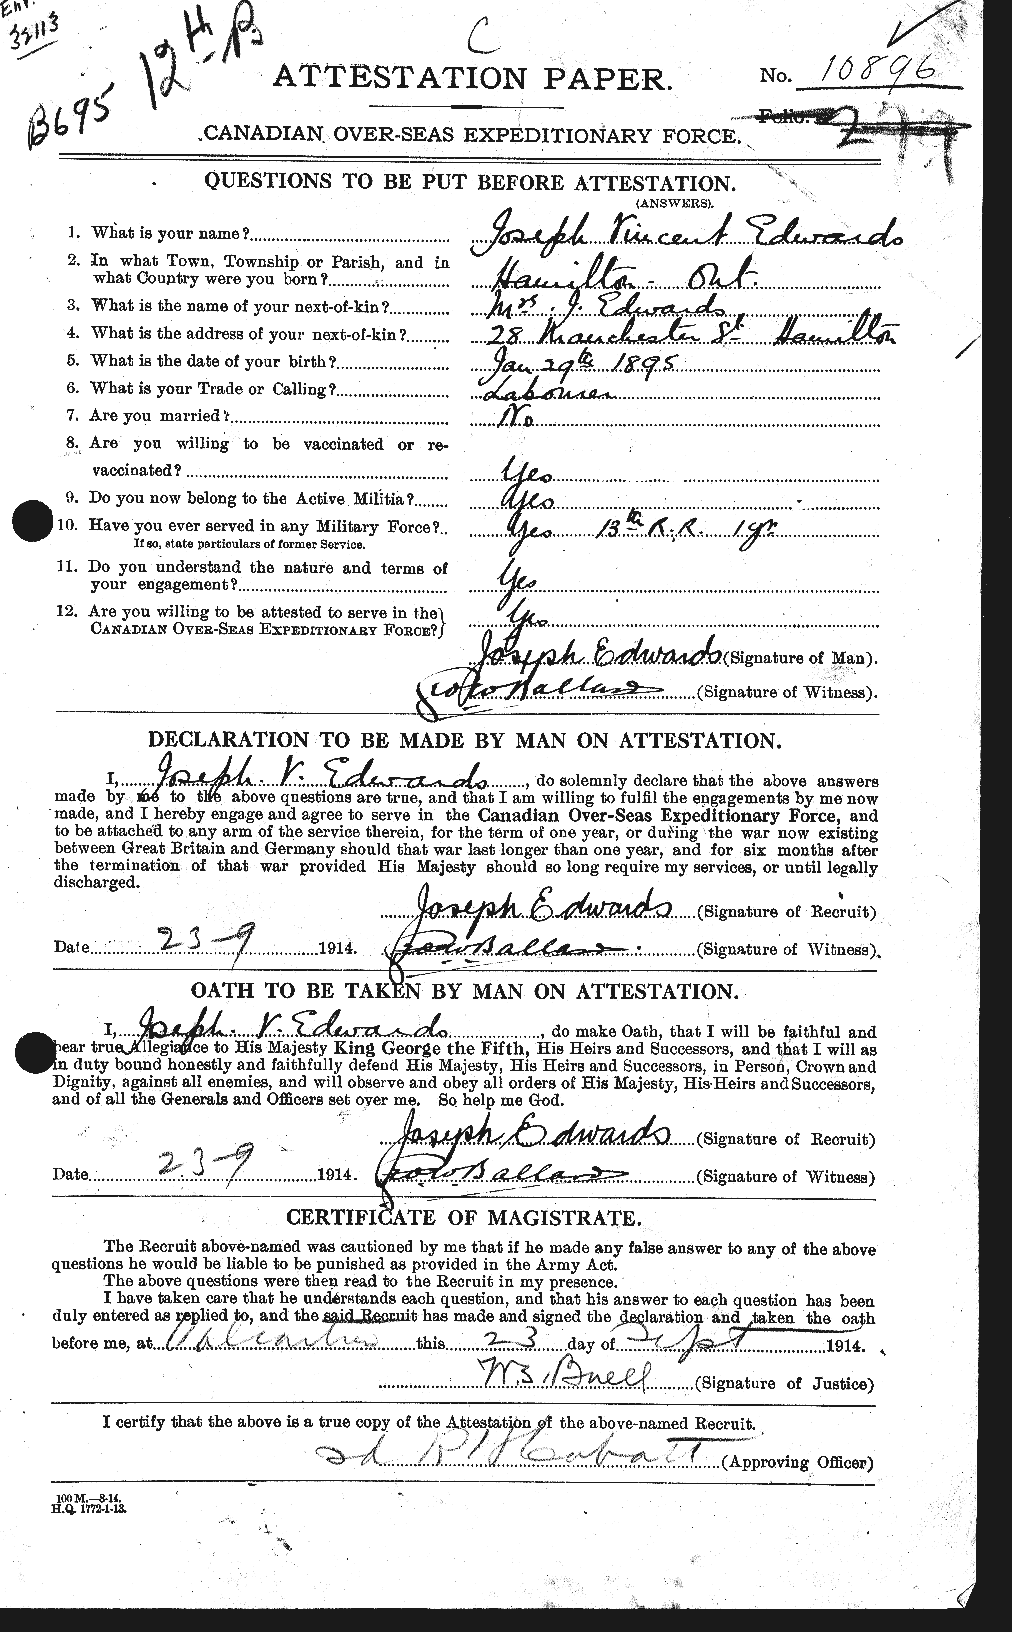 Personnel Records of the First World War - CEF 310186a